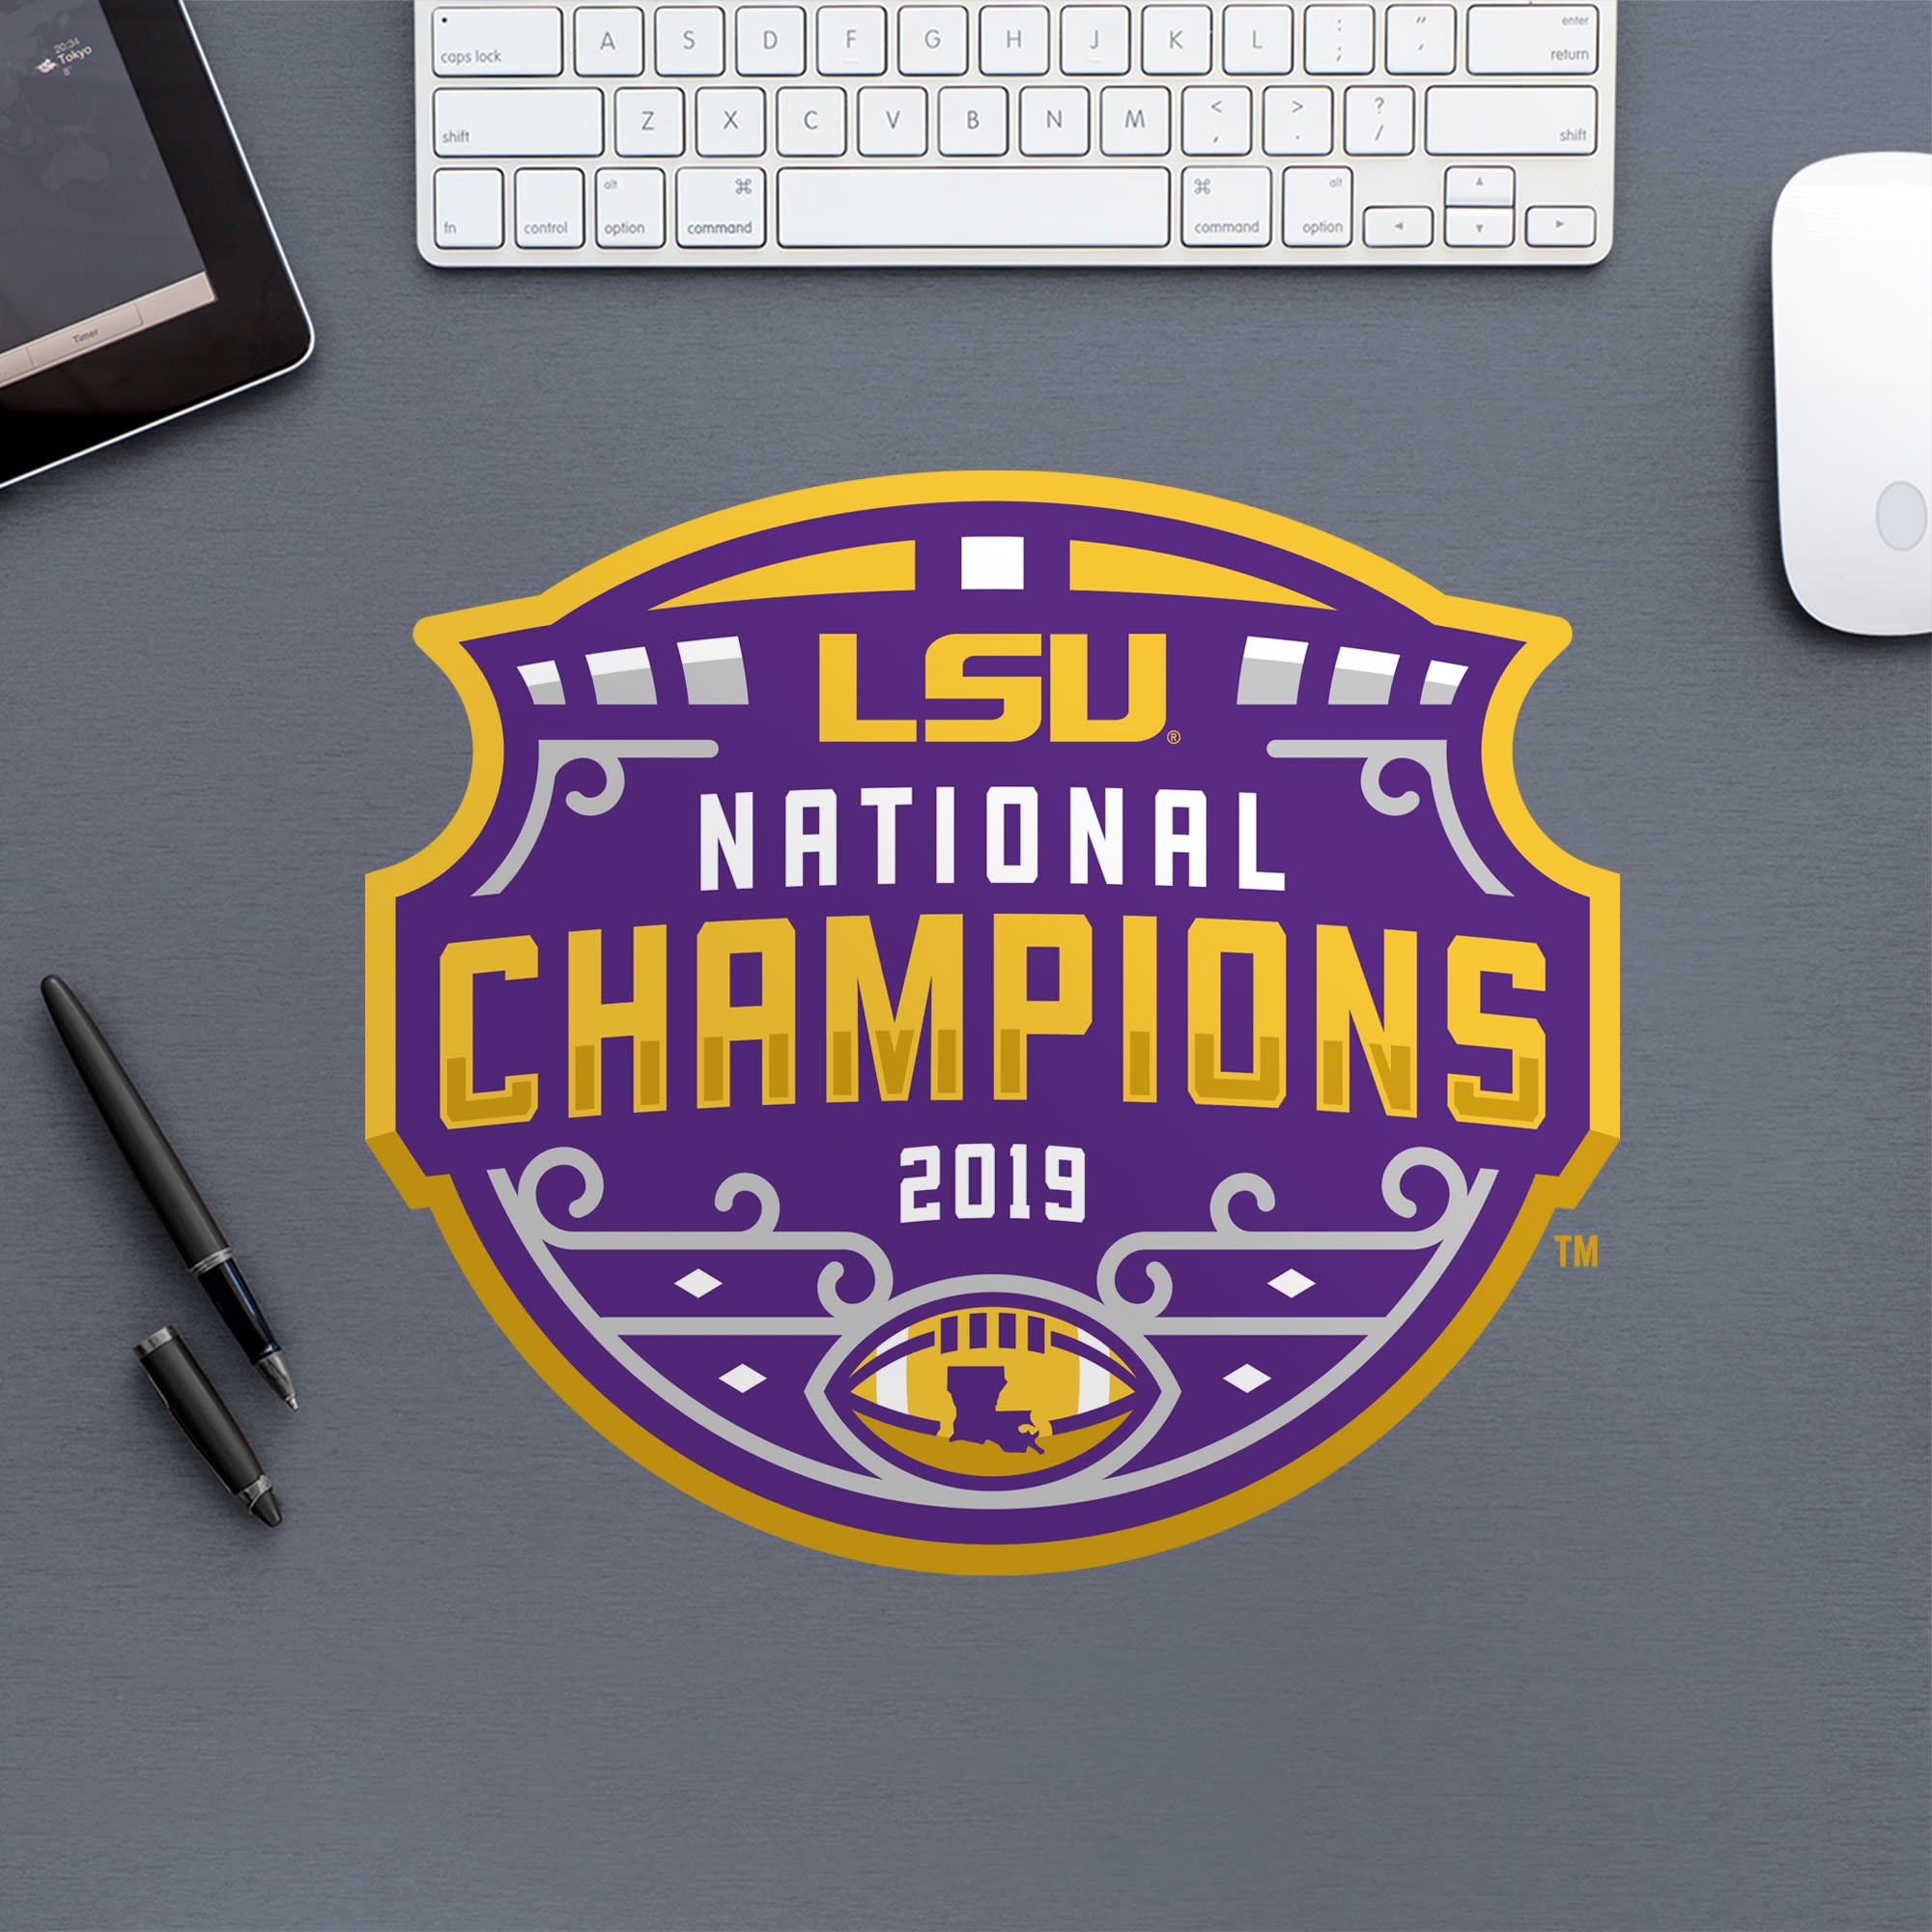 LSU Tigers: 2019 Football Champions Logo - Officially Licensed Removable Wall Decal Large by Fathead | Vinyl